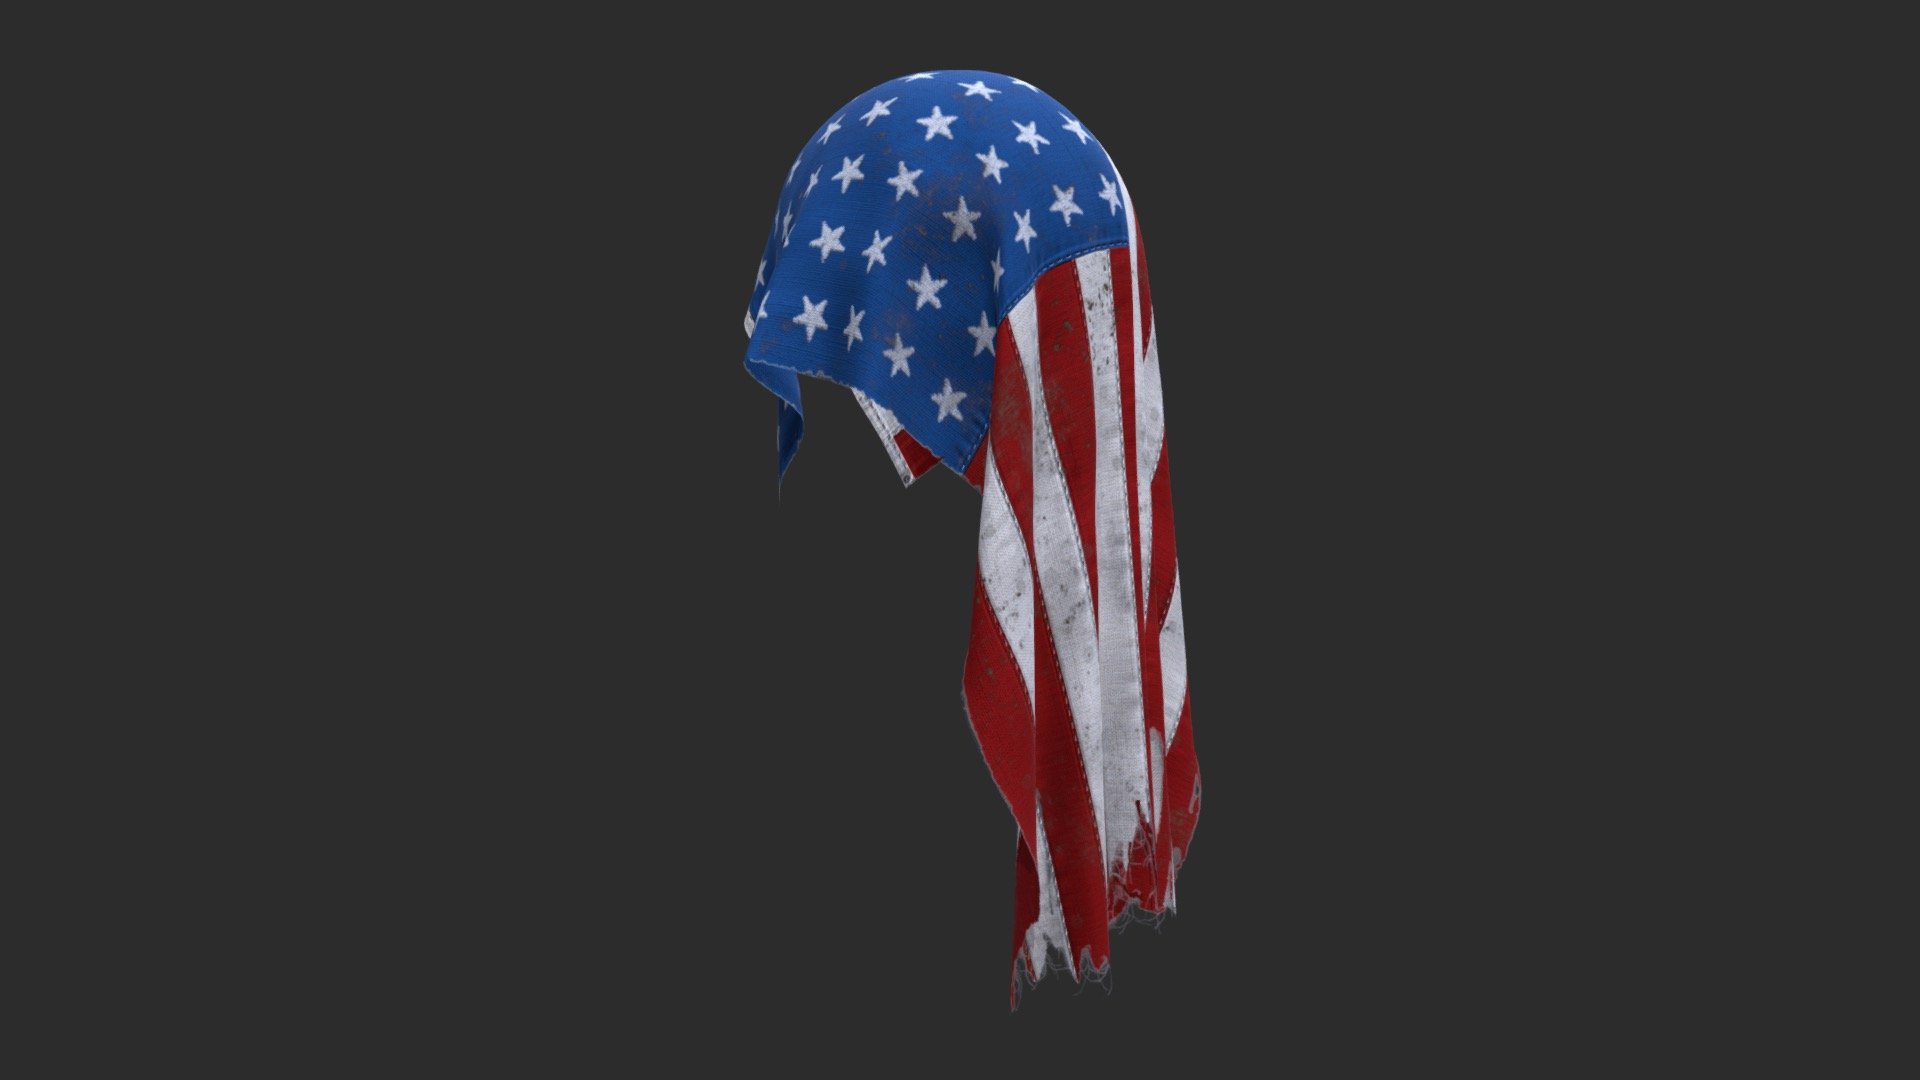 The 3D model of the American Flag used from 1912 to 1959 including 48 stars. 

This flag represents the historical one used by USA for the World War 1, the World War 2, the Corean War and the begining of the Vietnam War.

The Textures Maps are in 2K and ready for PBR workflow.

This asset includes the Blender native file, an animated version in low-poly and some static pose variants. The textures includes 3 variants of the Flag : Clean, Dirty and Bloody.

ANIMATED ASSET




Objects : 1

Polygons : 36

Materials : 3

LODs : No

ANIMATIONS




Rigged : Yes (including armature and bones, no physics animations)

Actions : 2 (Simple in 138 frames - Natural in 575 frames)

Loop : Yes



STATIC ASSETS




Objects : 5

Polygons : 144 or 576

Materials : 3 (sames as the animated version)

LODs : Yes

Number of LODs : 2

 - US Flag 48 Stars 1912-1959 - Buy Royalty Free 3D model by KangaroOz 3D (@KangaroOz-3D) 3d model